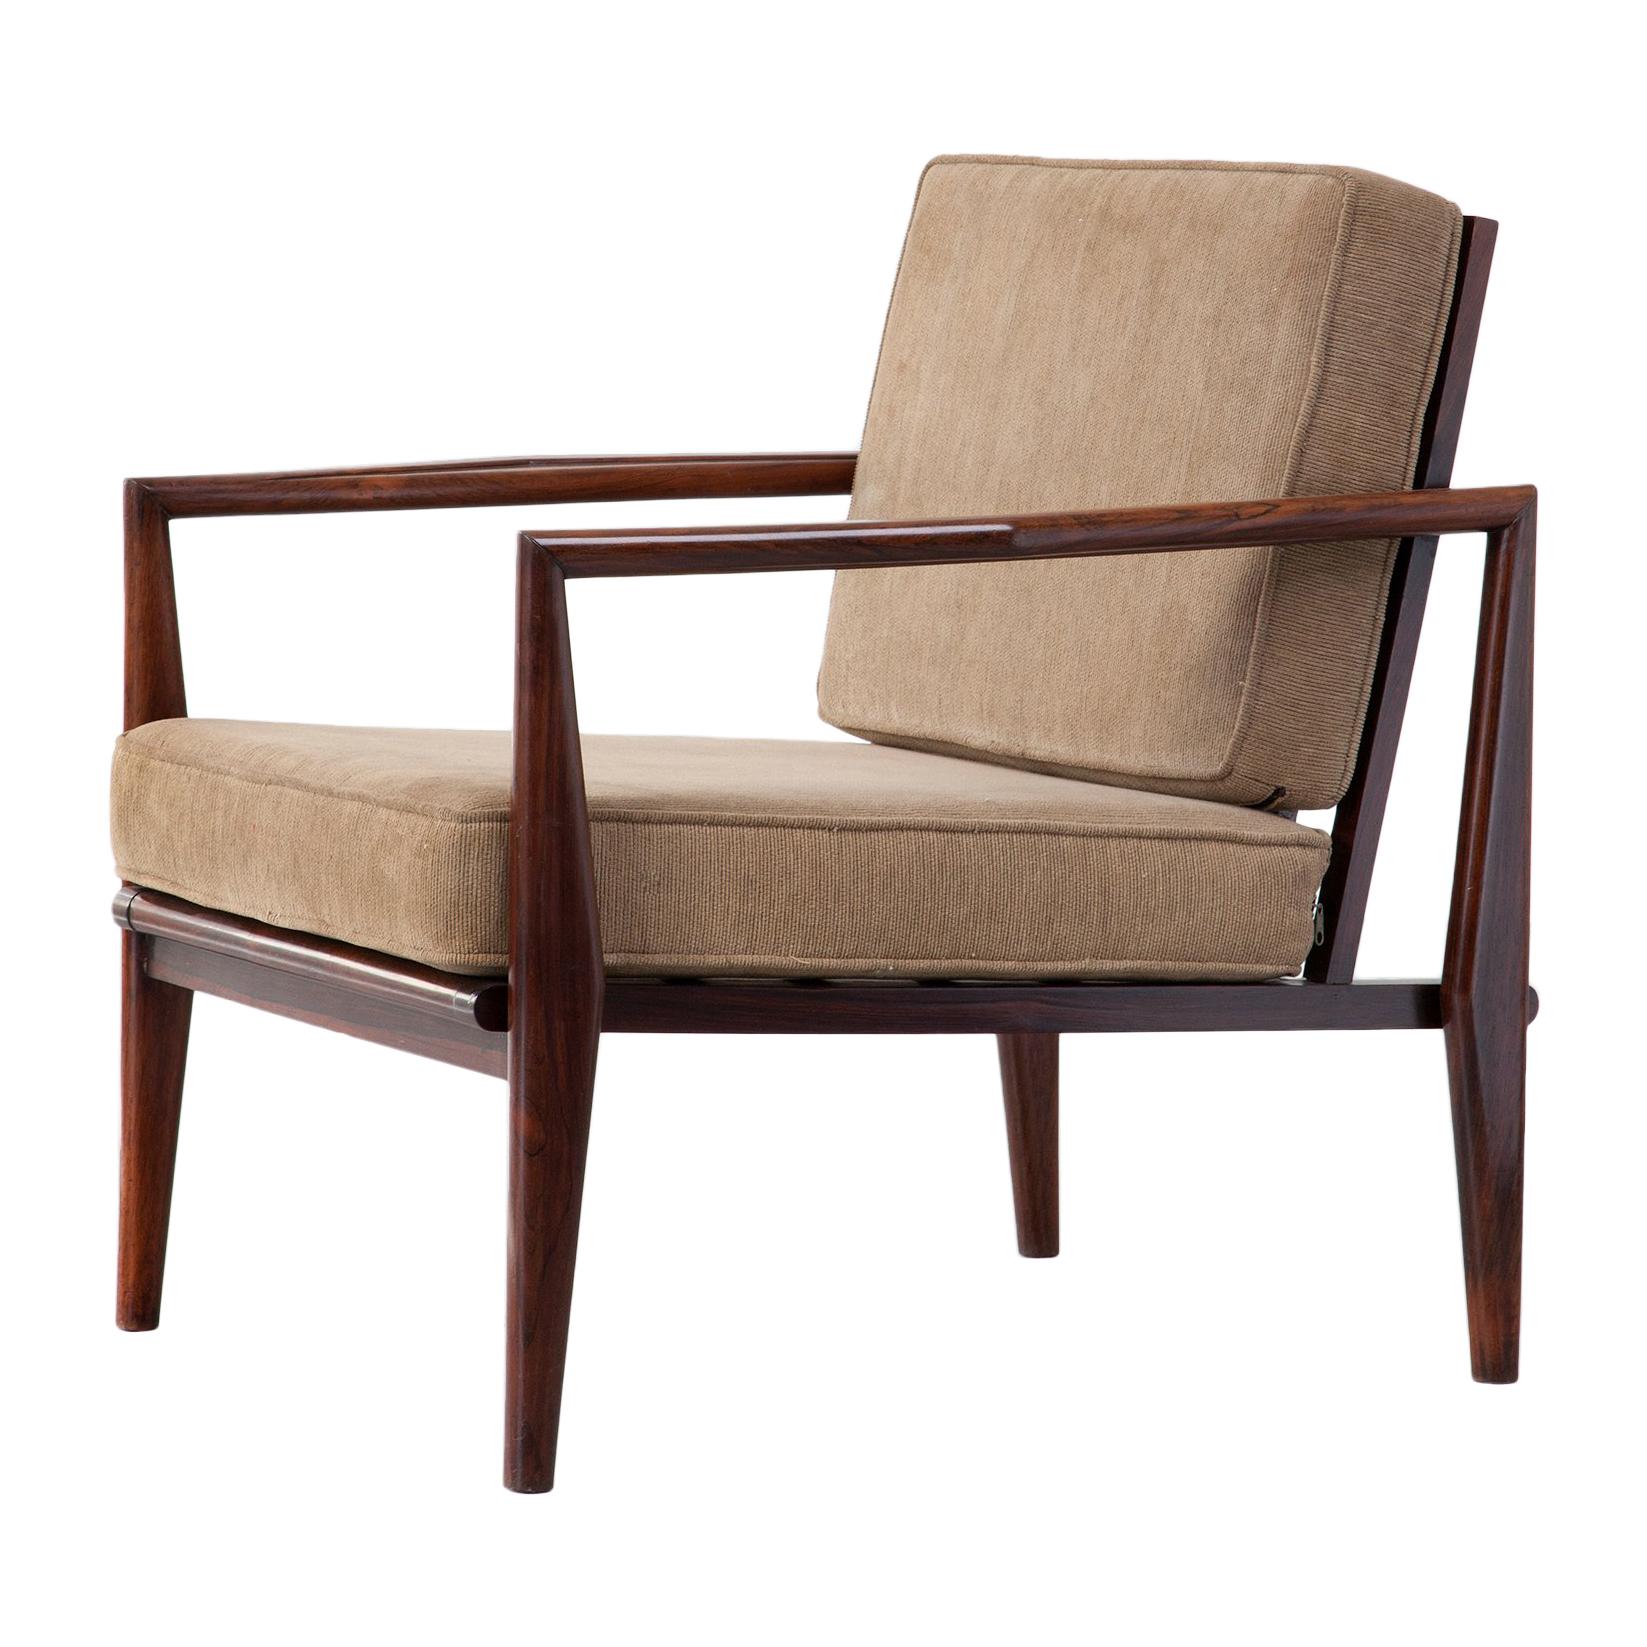 Lounge Chair in Rosewood with Beige Upholstery by Fatima, circa 1960